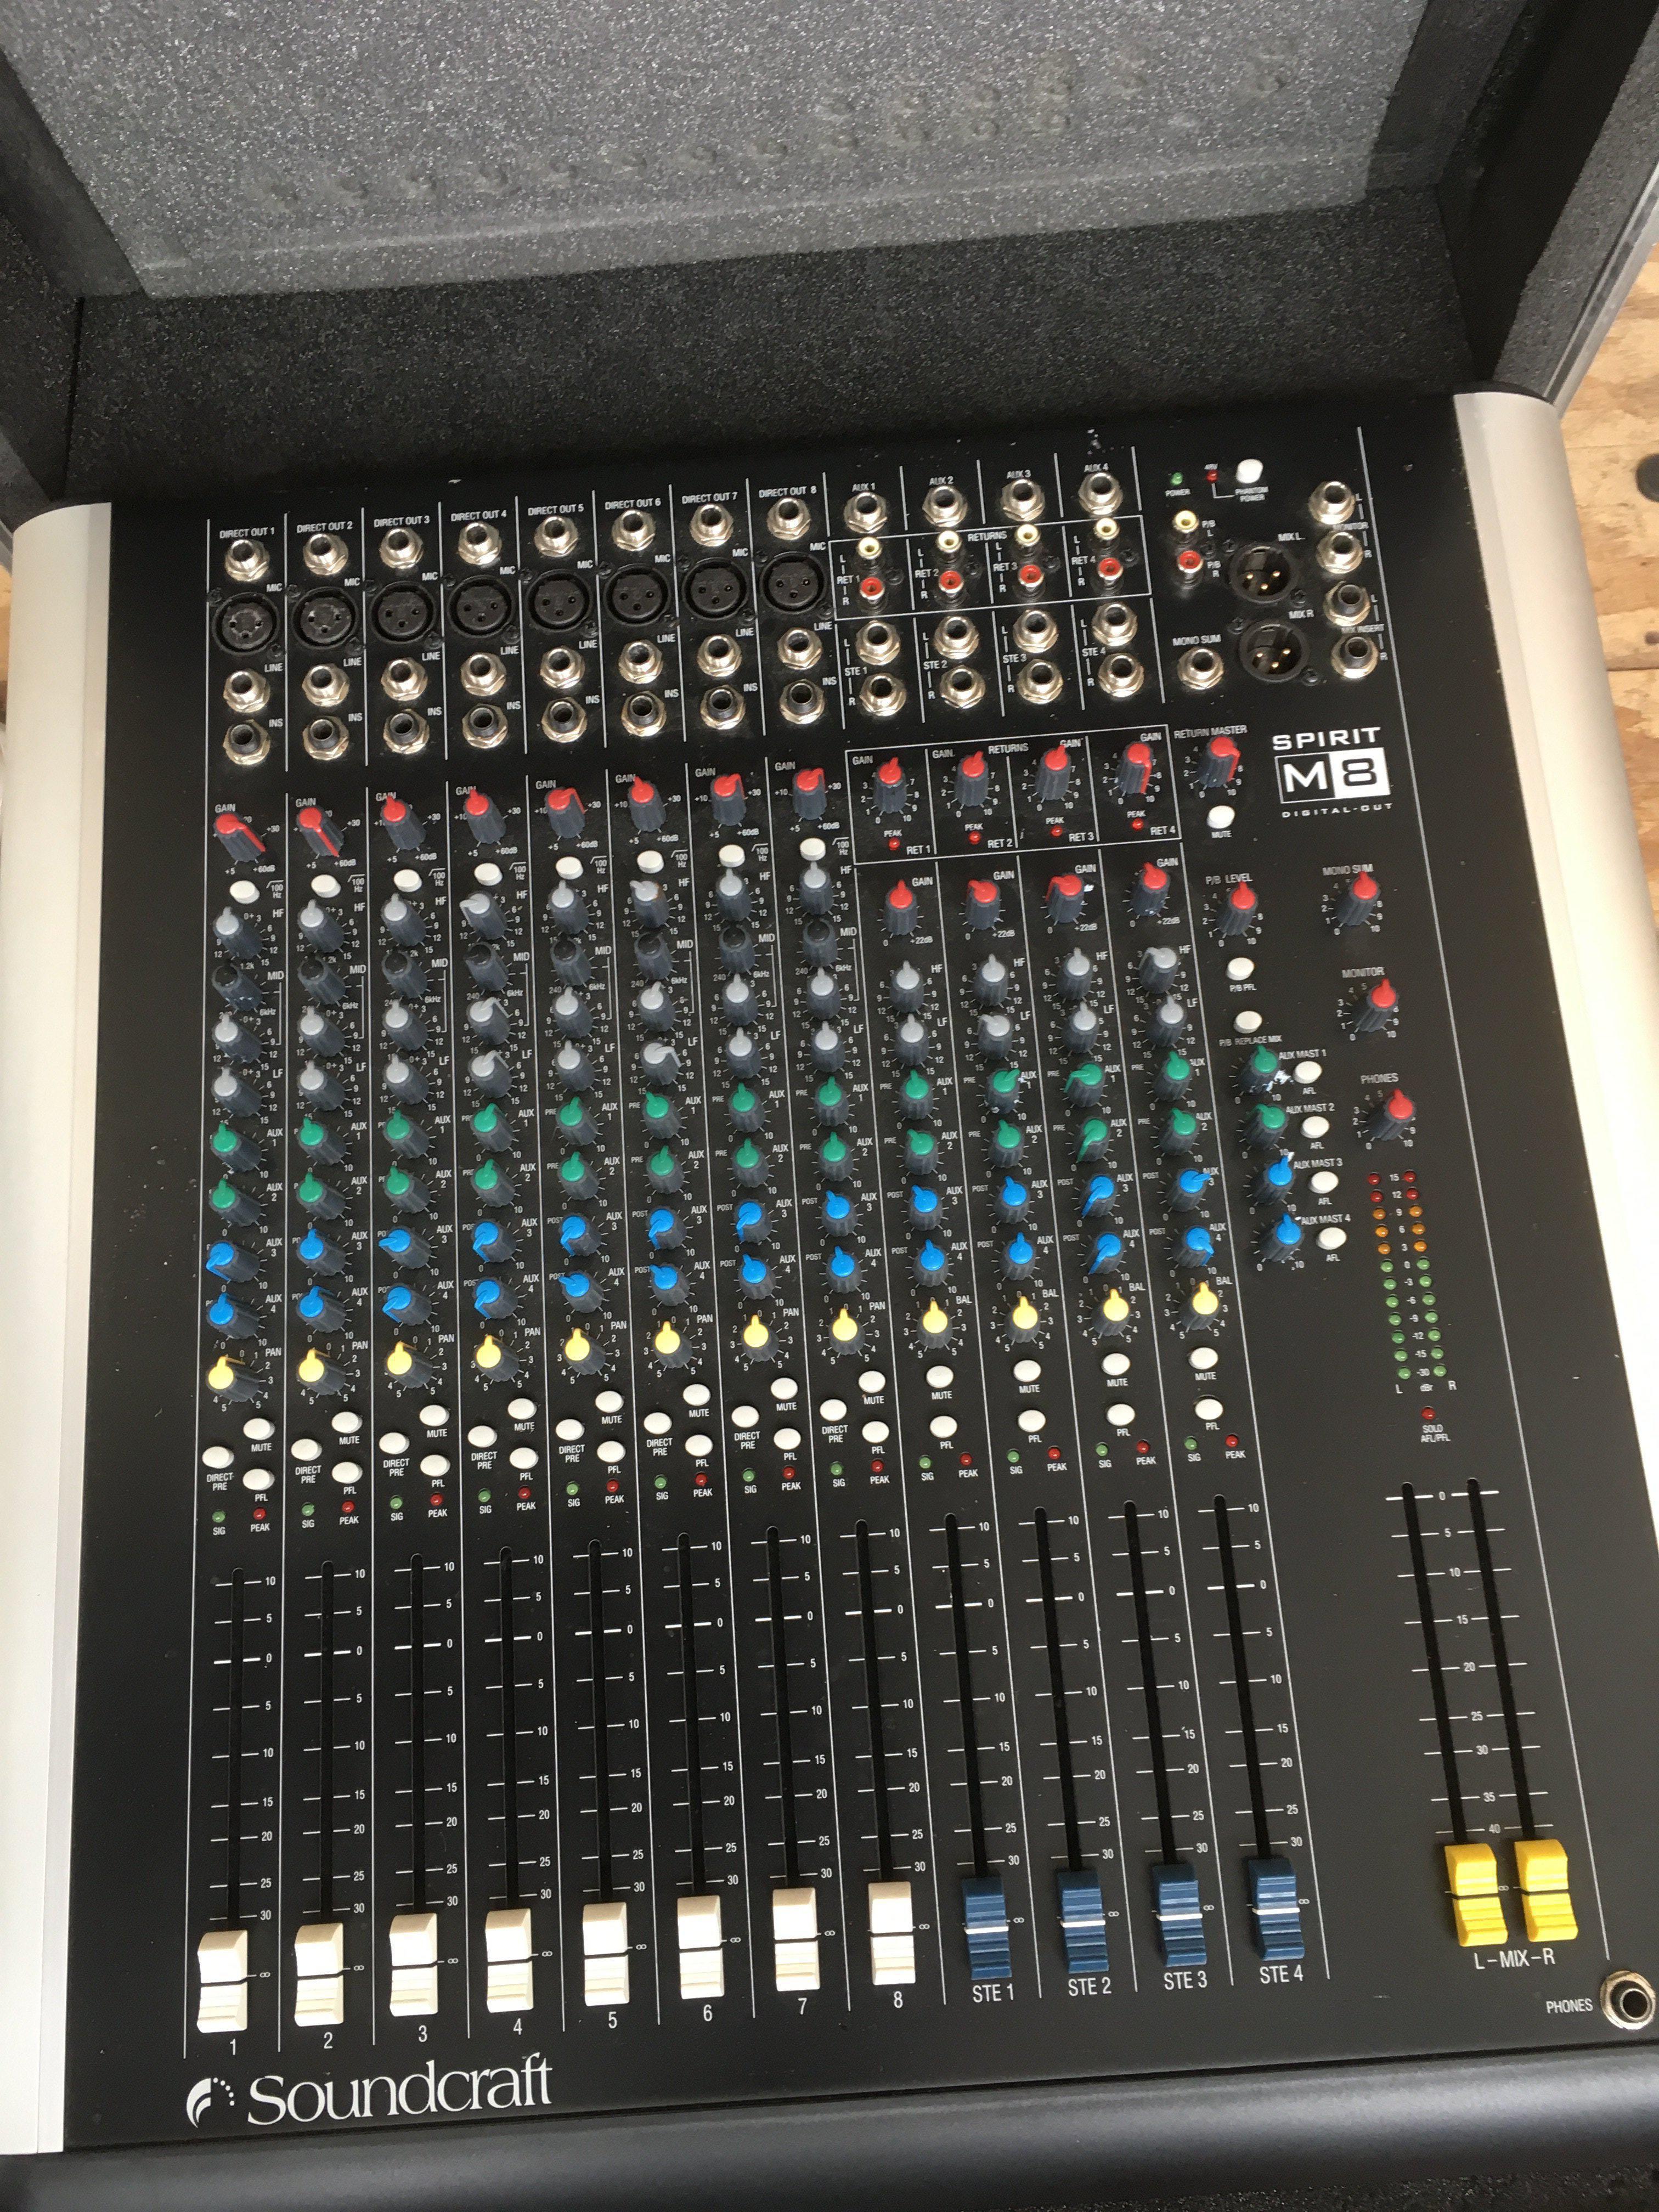 A Soundcraft Spirit M8 8 track mixing console supp